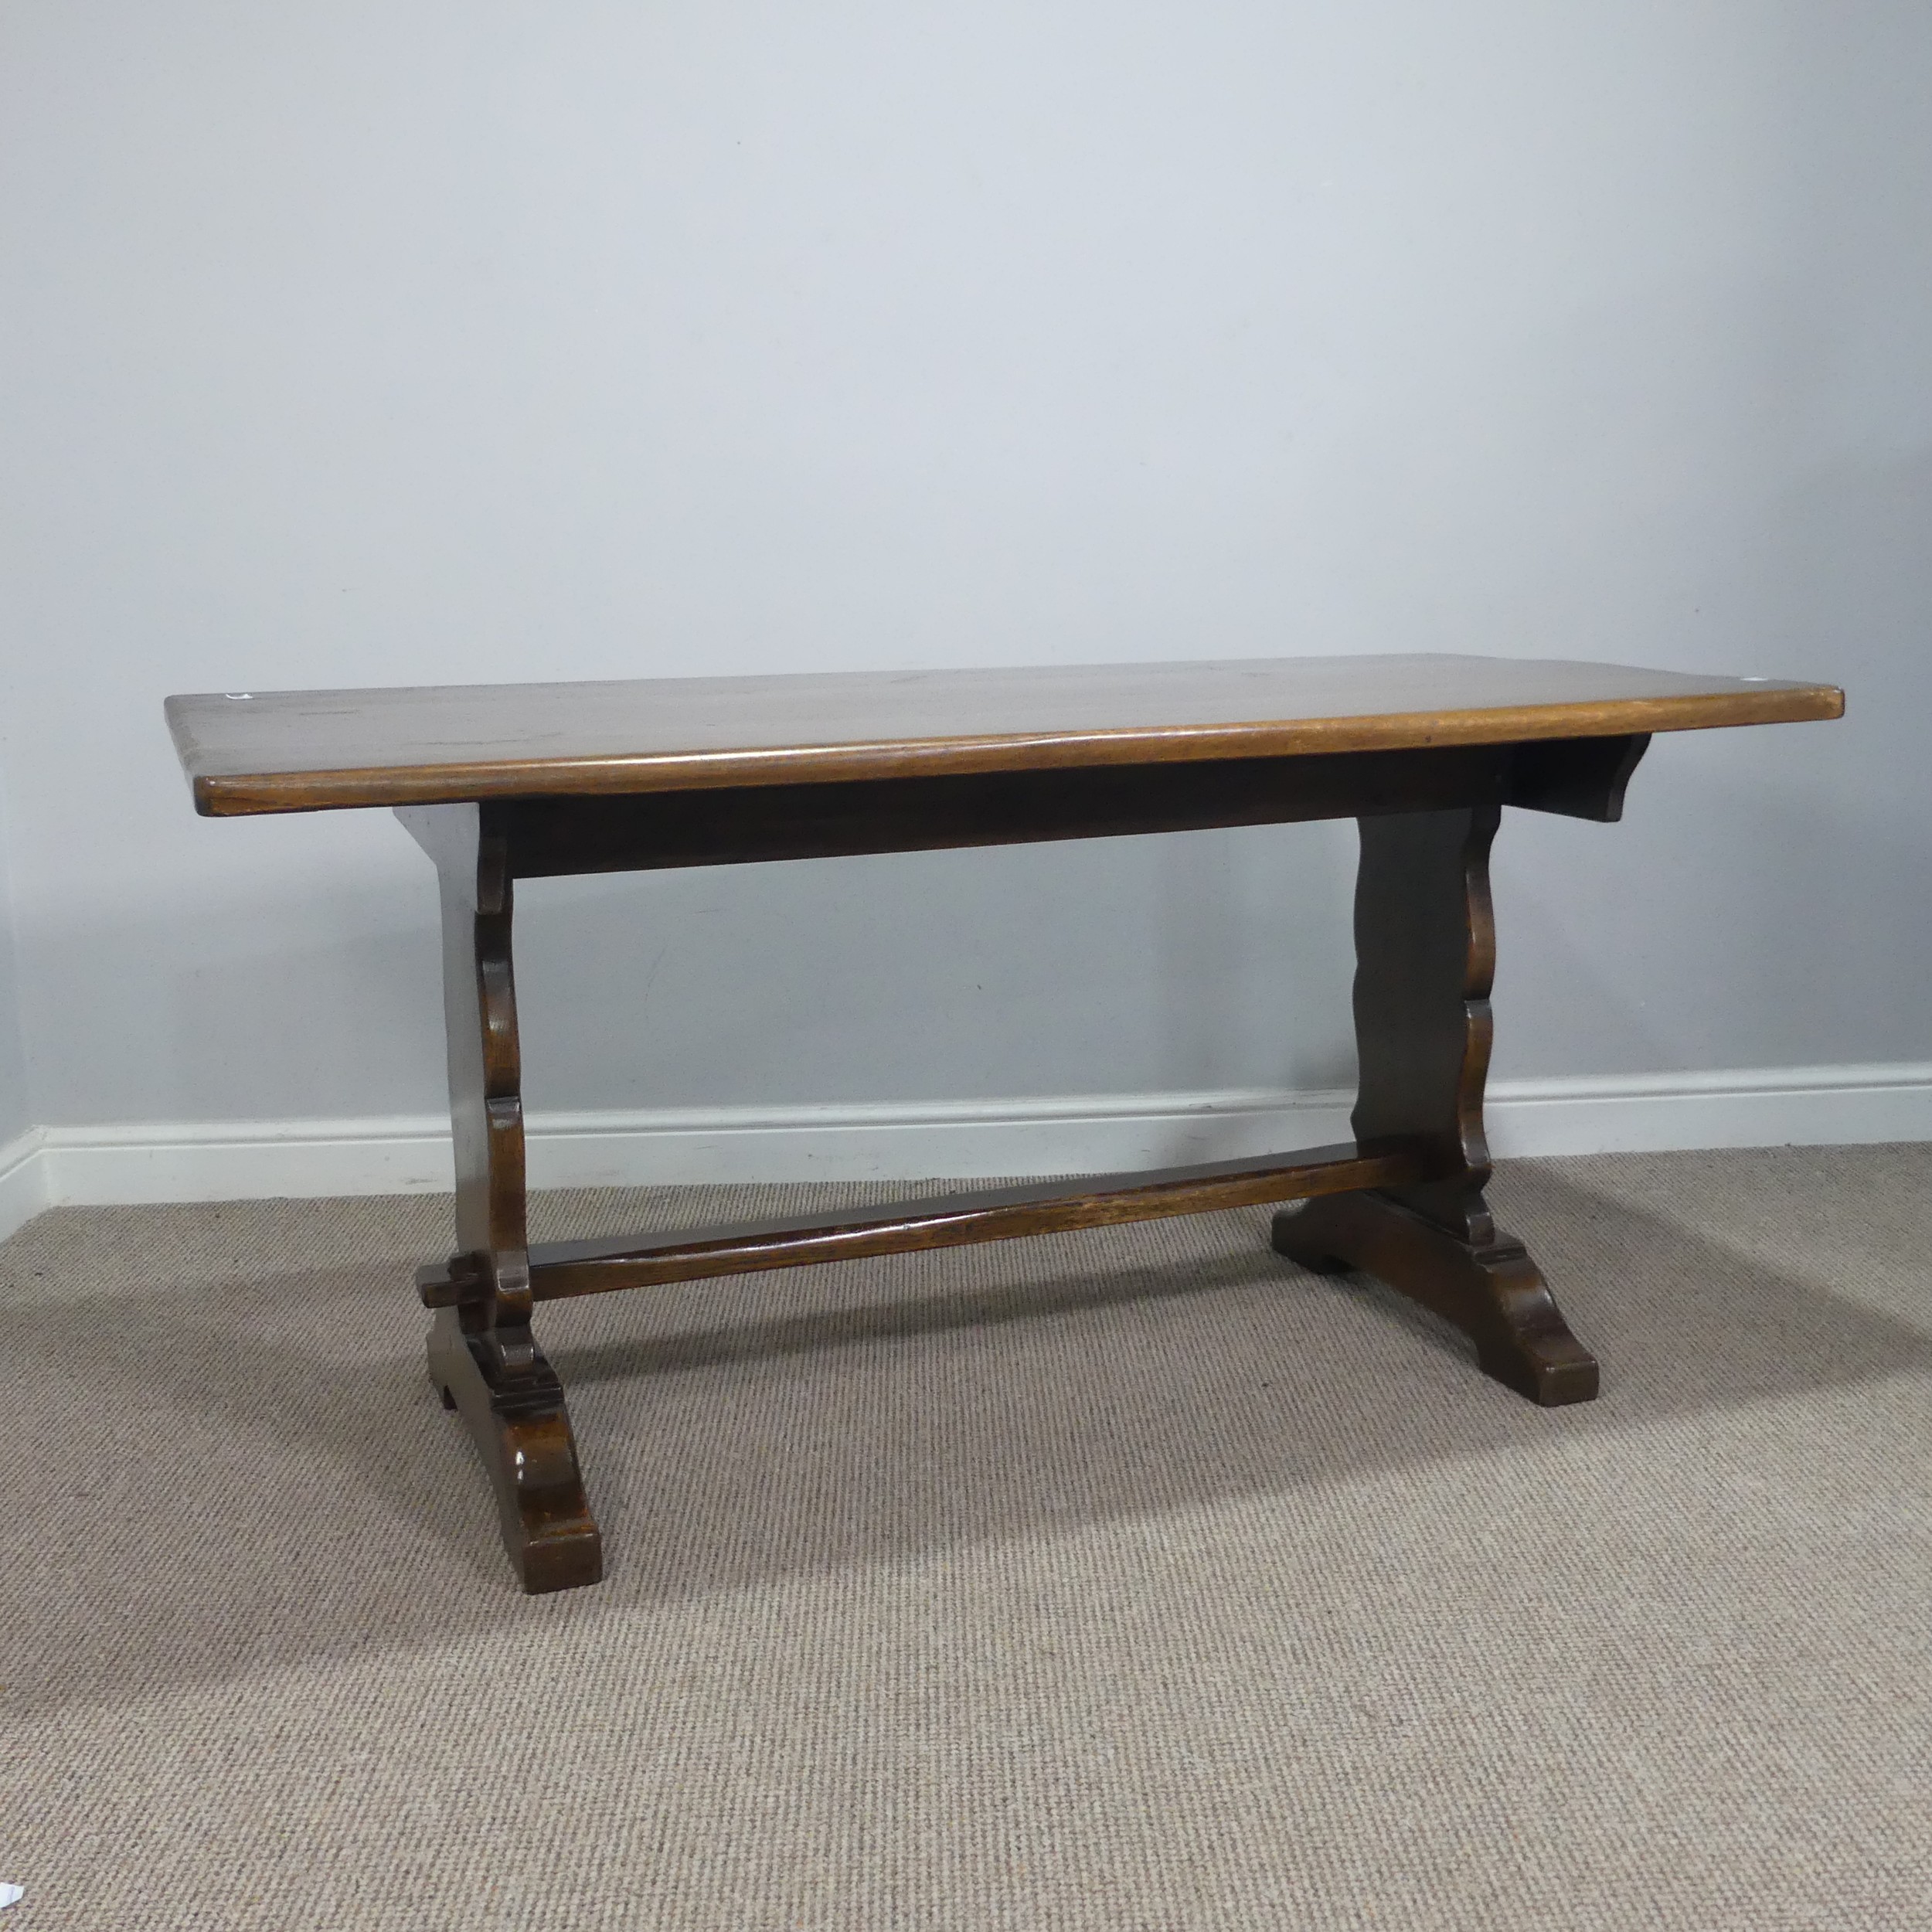 A craftsman style oak refectory dining Table, retailed by 'Shepherd & Hedger, Southampton', label